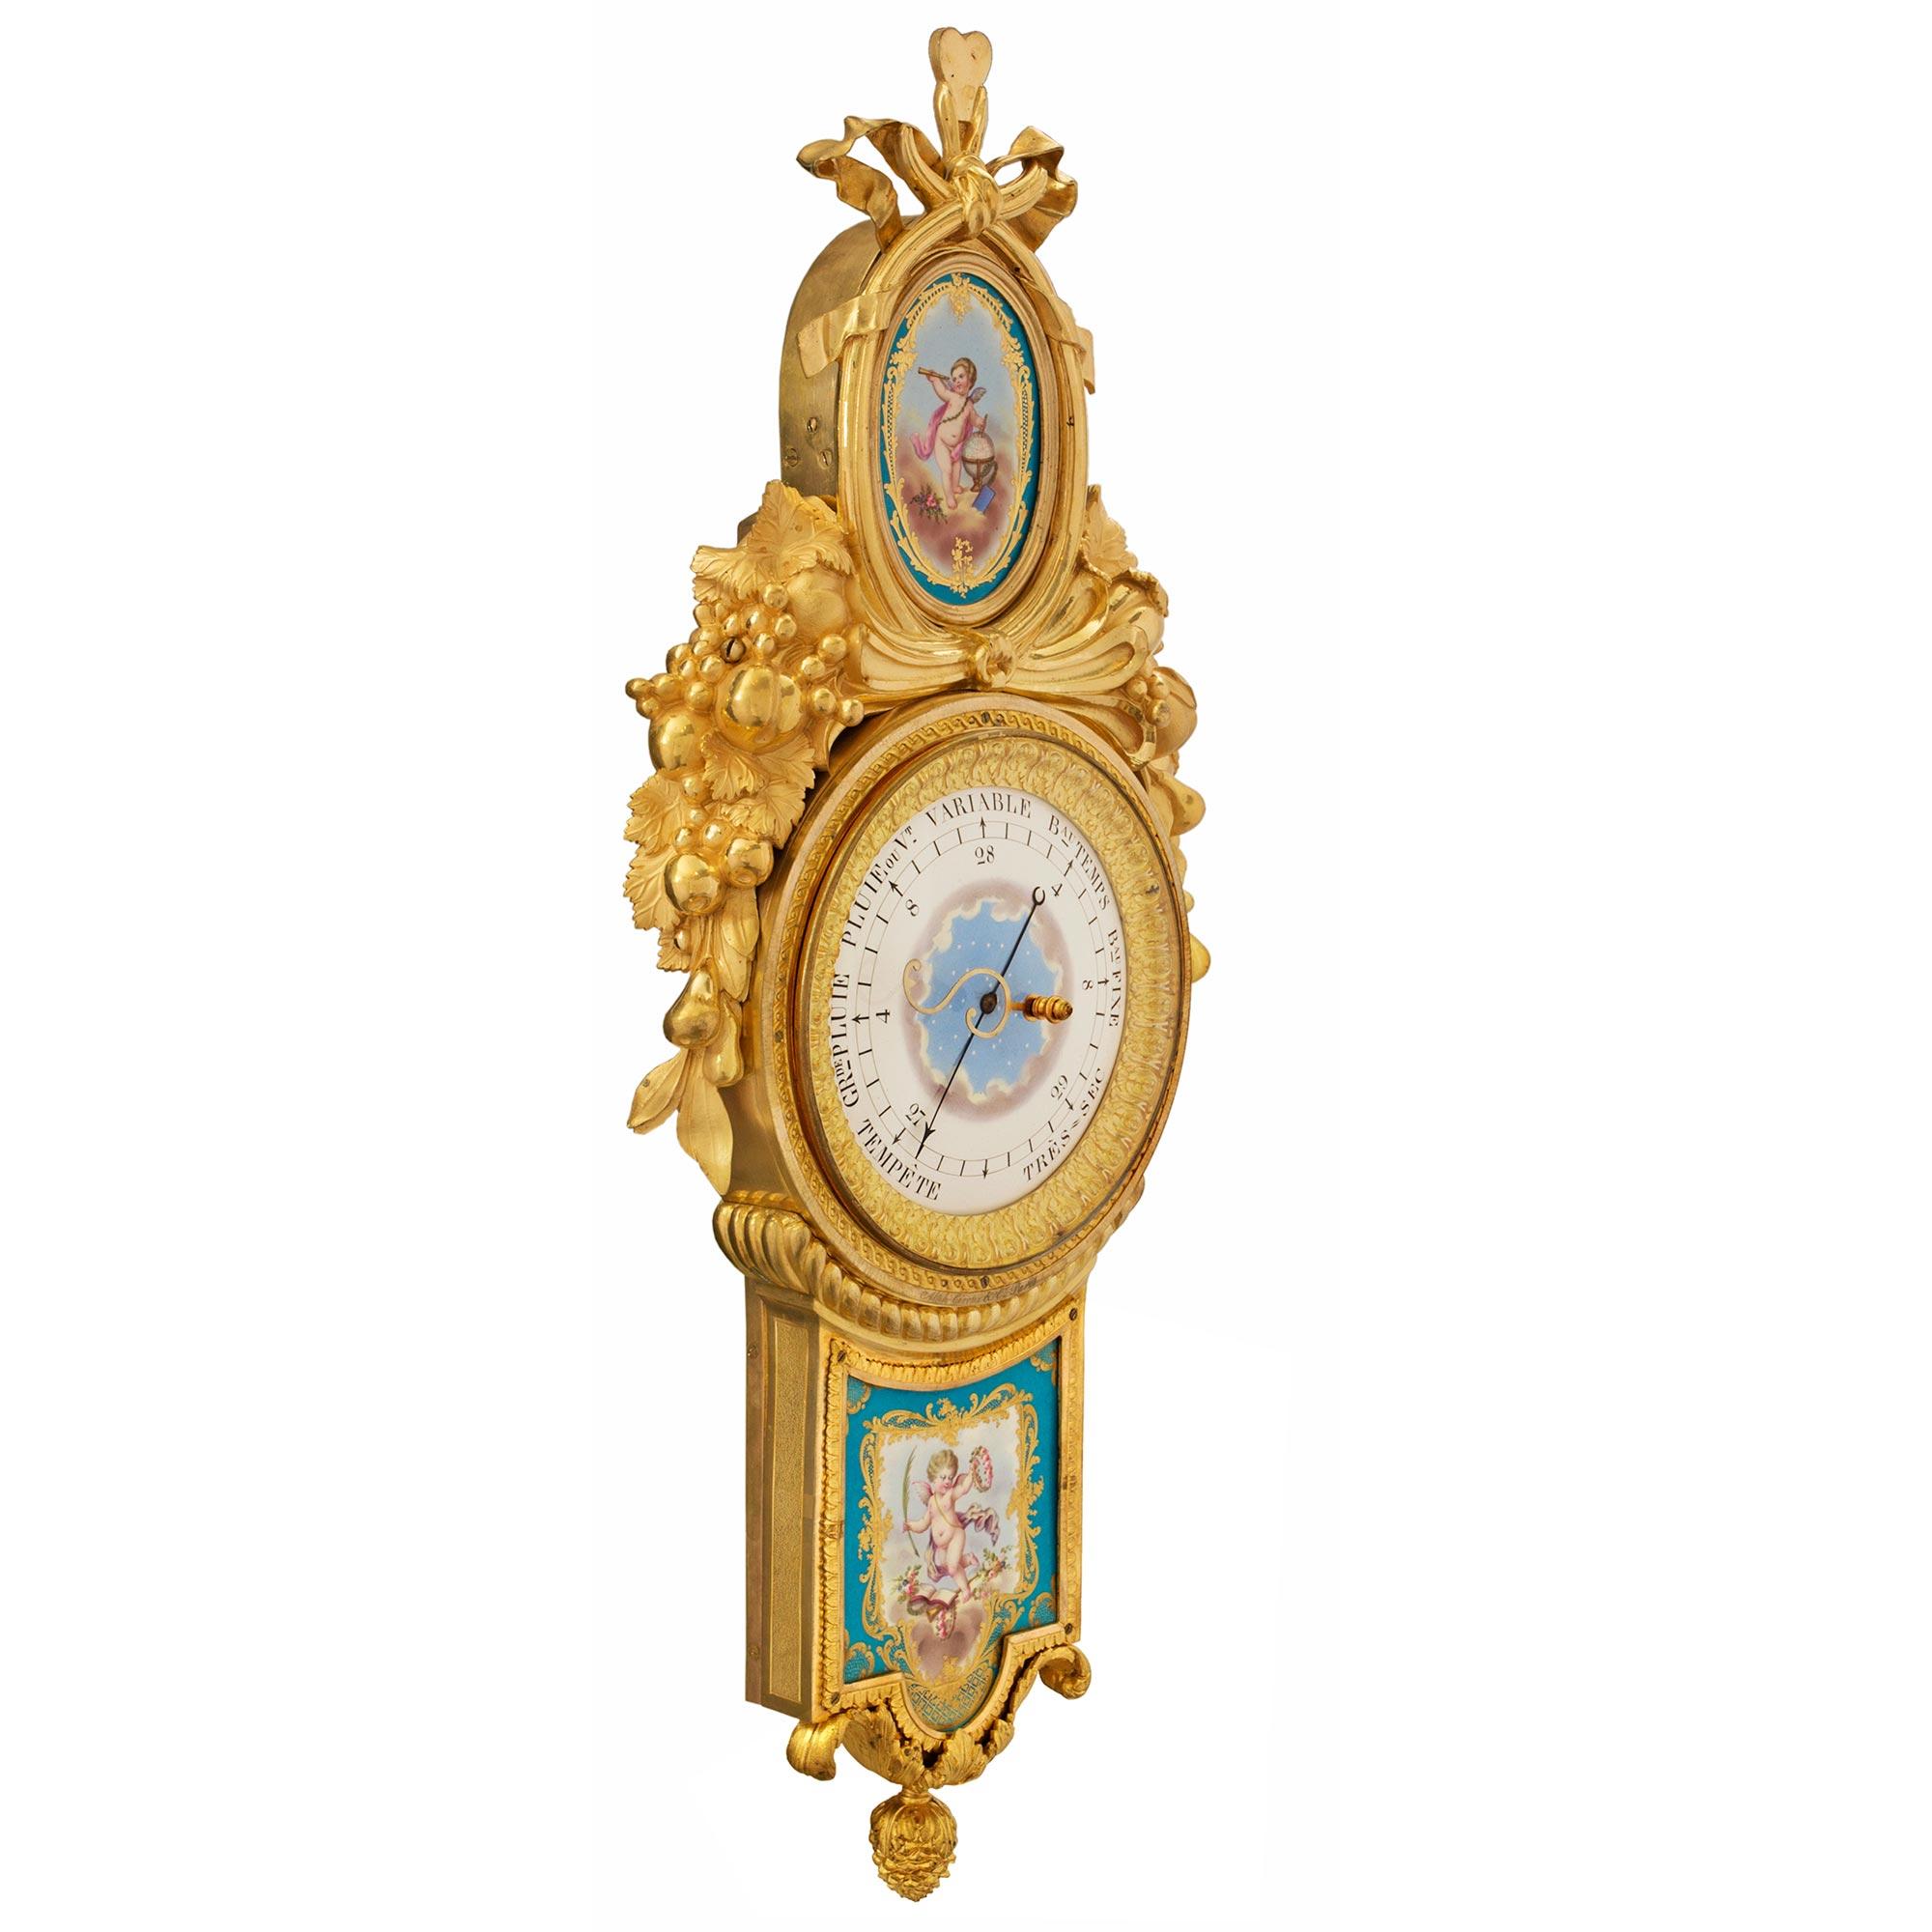 An most elegant and extremely high quality French late 18th/ beginning of the 19th century, ormolu and Sèvres porcelain barometer, signed Giroux. The barometer has a central bottom acorn finial flanked by two 'S' scrolled acanthus leaves. A fitted